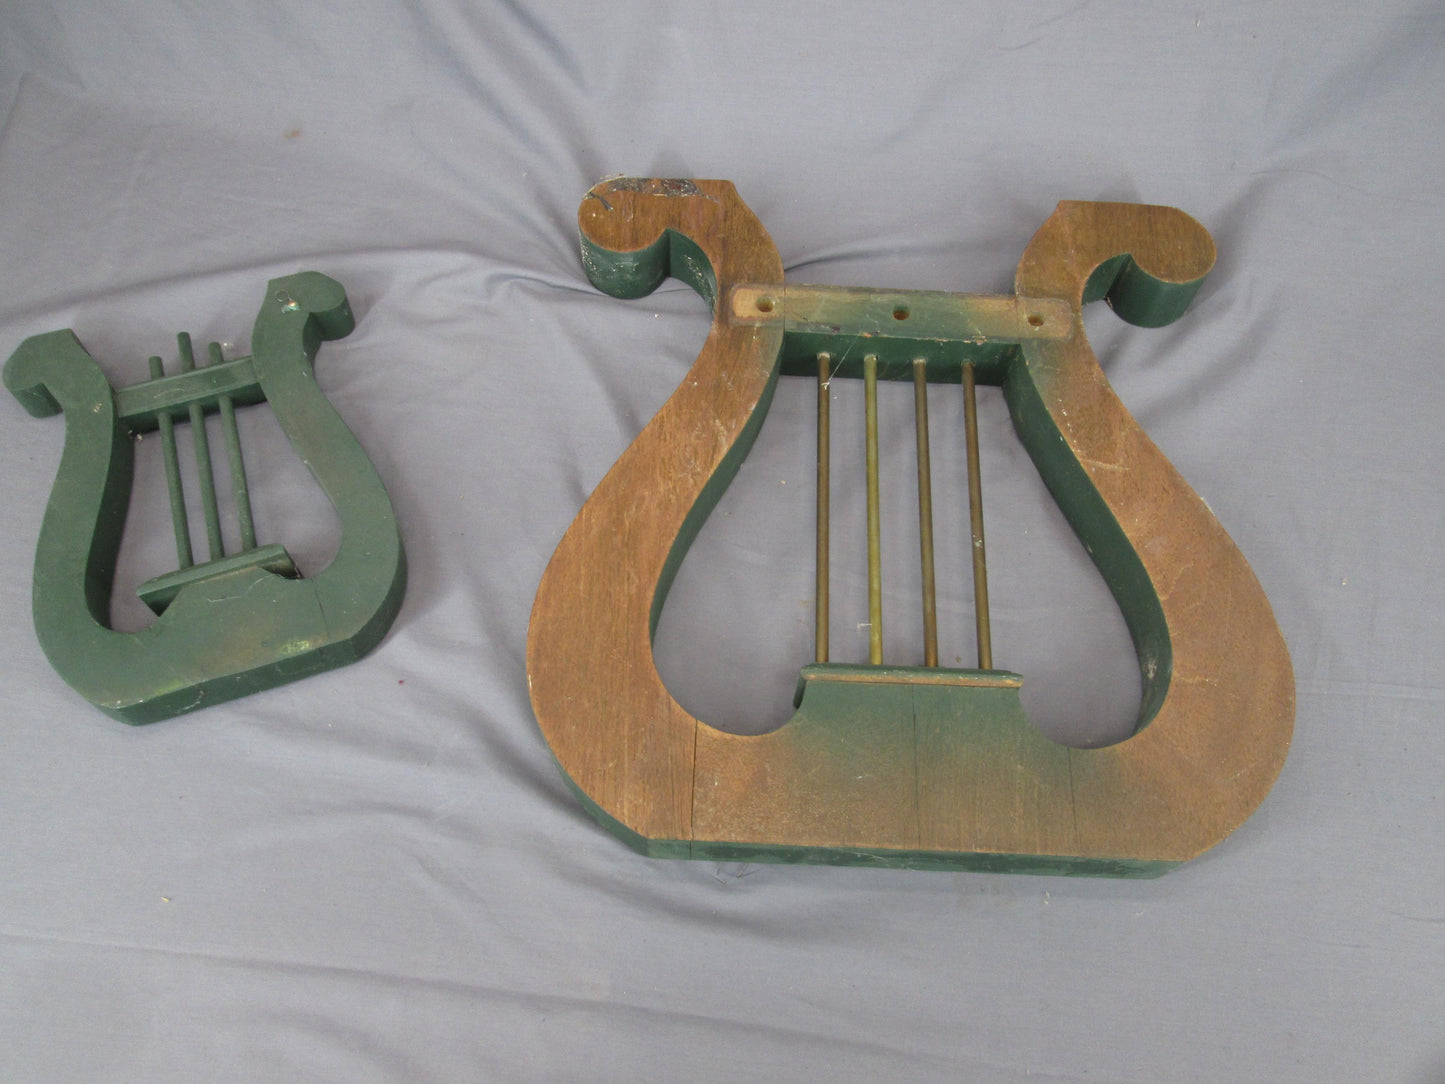 0124 - Wood Cutouts in the Shape of a Lyre